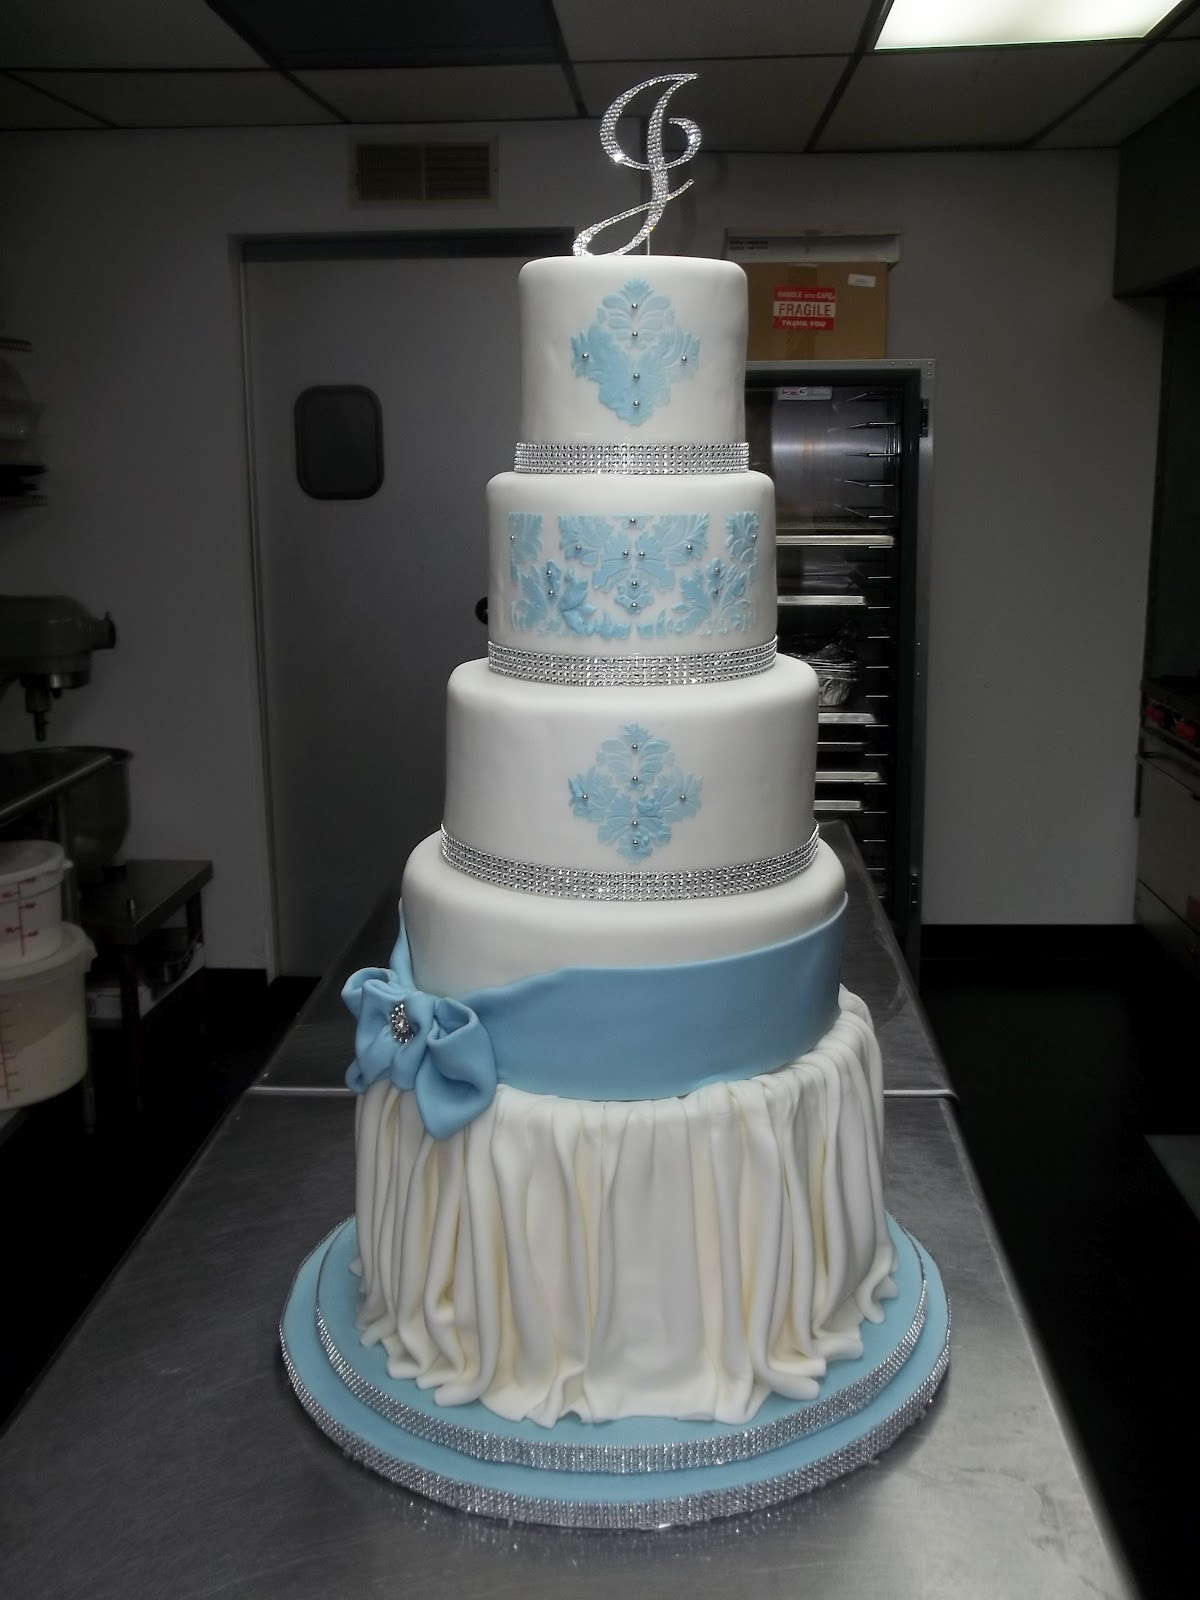 Wedding Cakes St Louis
 The Sin City Mad Baker Nicole s Wedding Cake in St Louis